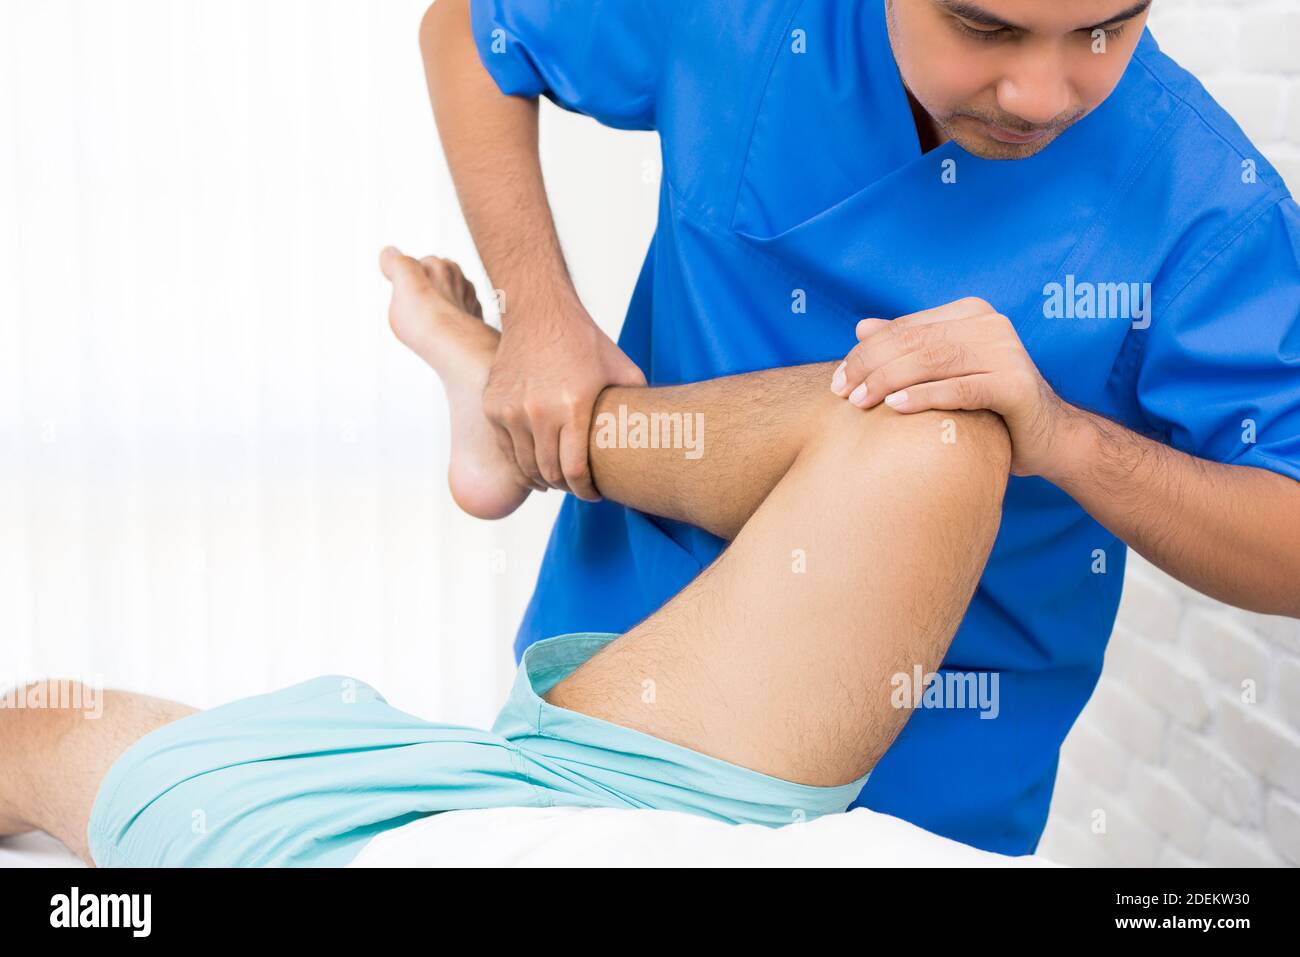 Doctor (therapist) holding leg of male patient stretching his lower back while lying on the bed in hospital - physiotherapy concept Stock Photo